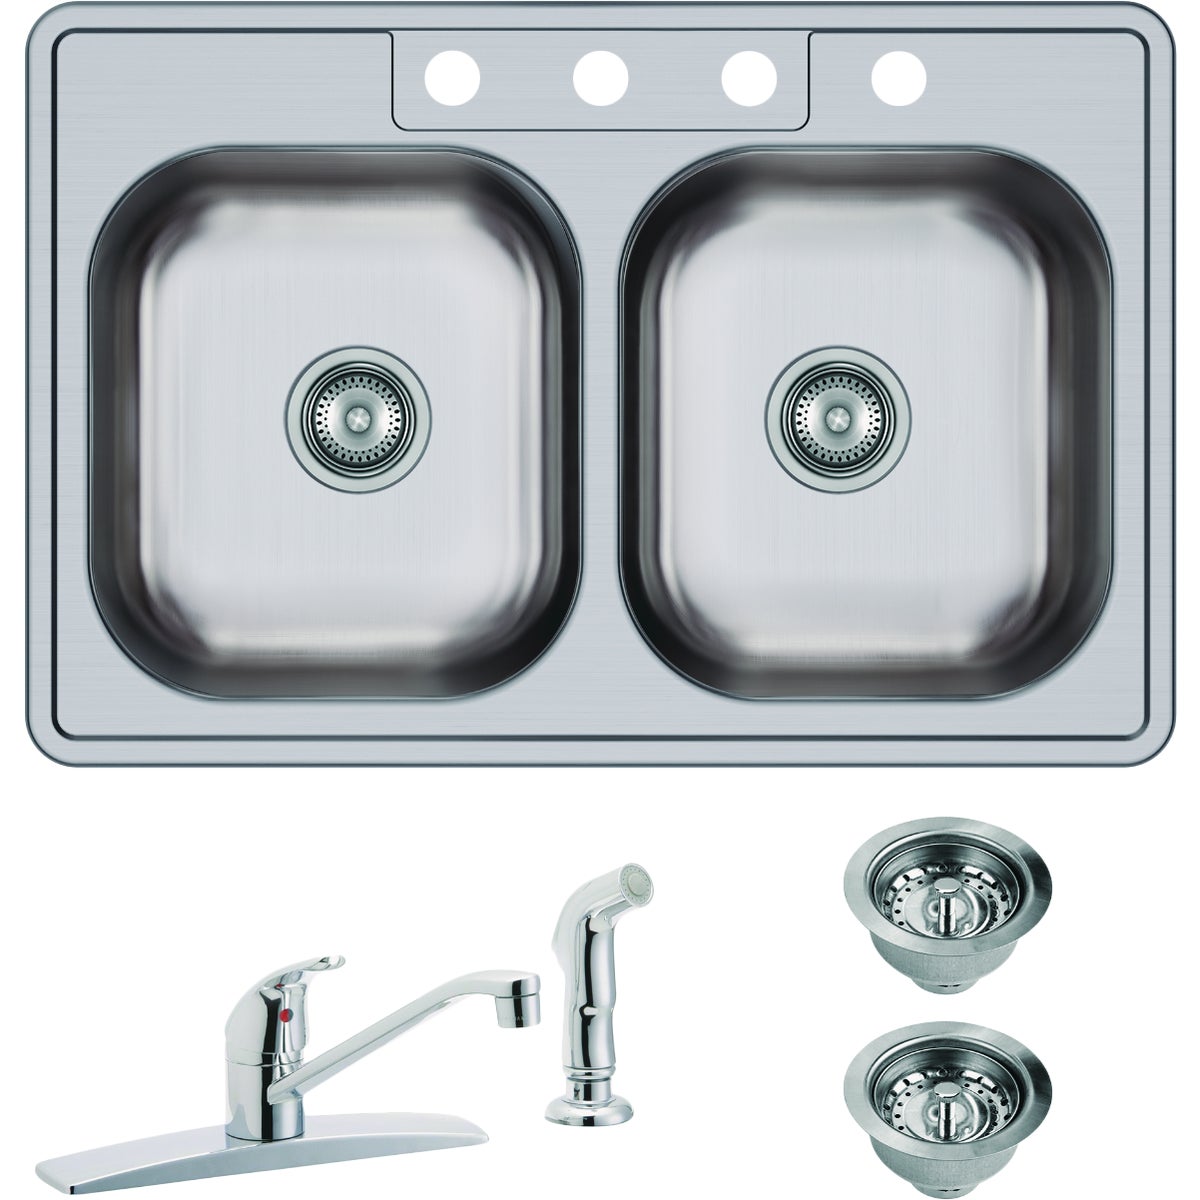 Elkay Dayton Double Bowl 33 In. x 22 In. x 7-1/16 In. Deep Stainless Steel Kitchen Sink and Faucet Kit, Top Mount 